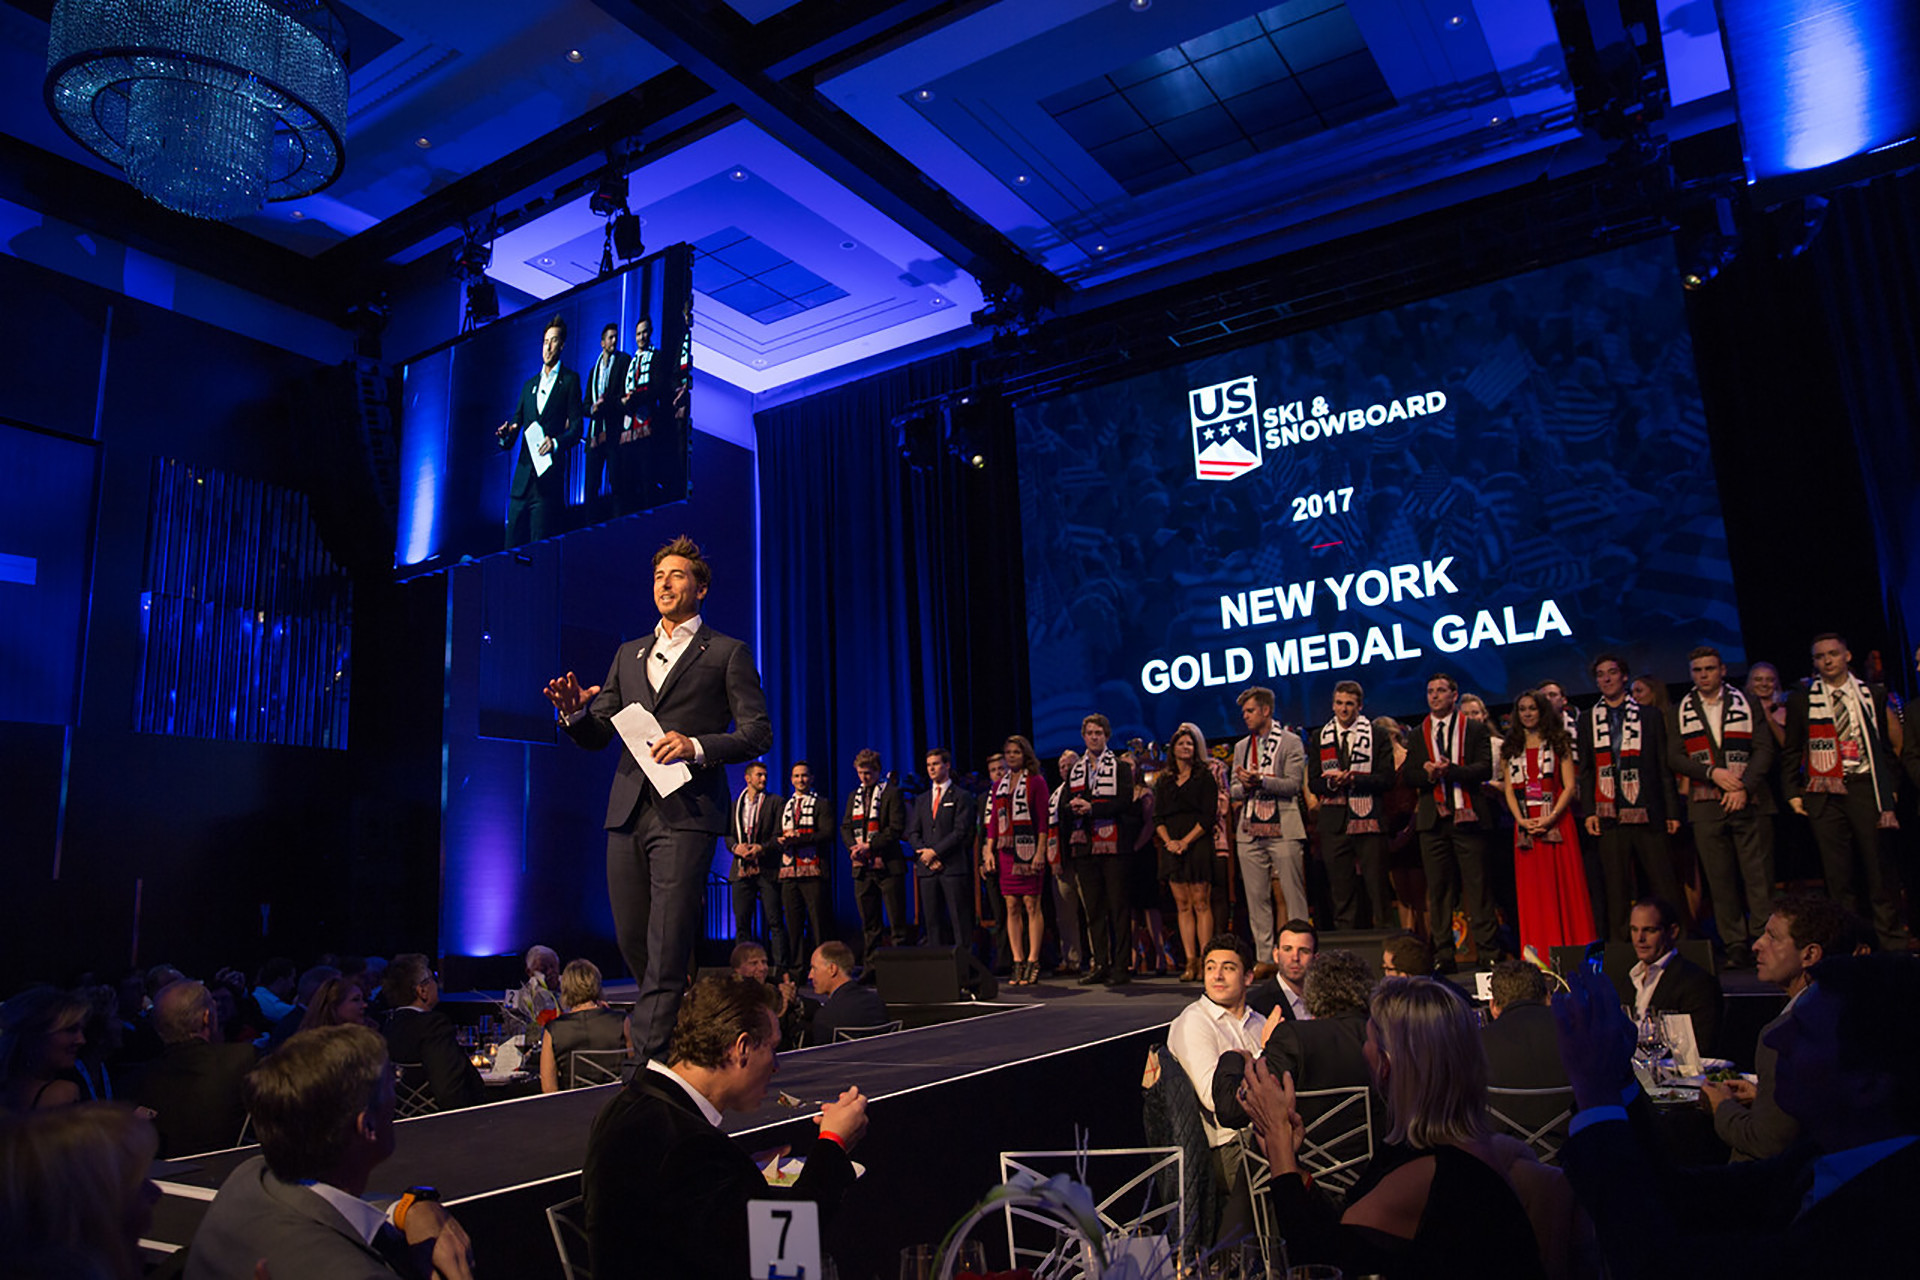 New York City gala dinner to raise funds for U.S. Ski & Snowboard set to sell-out